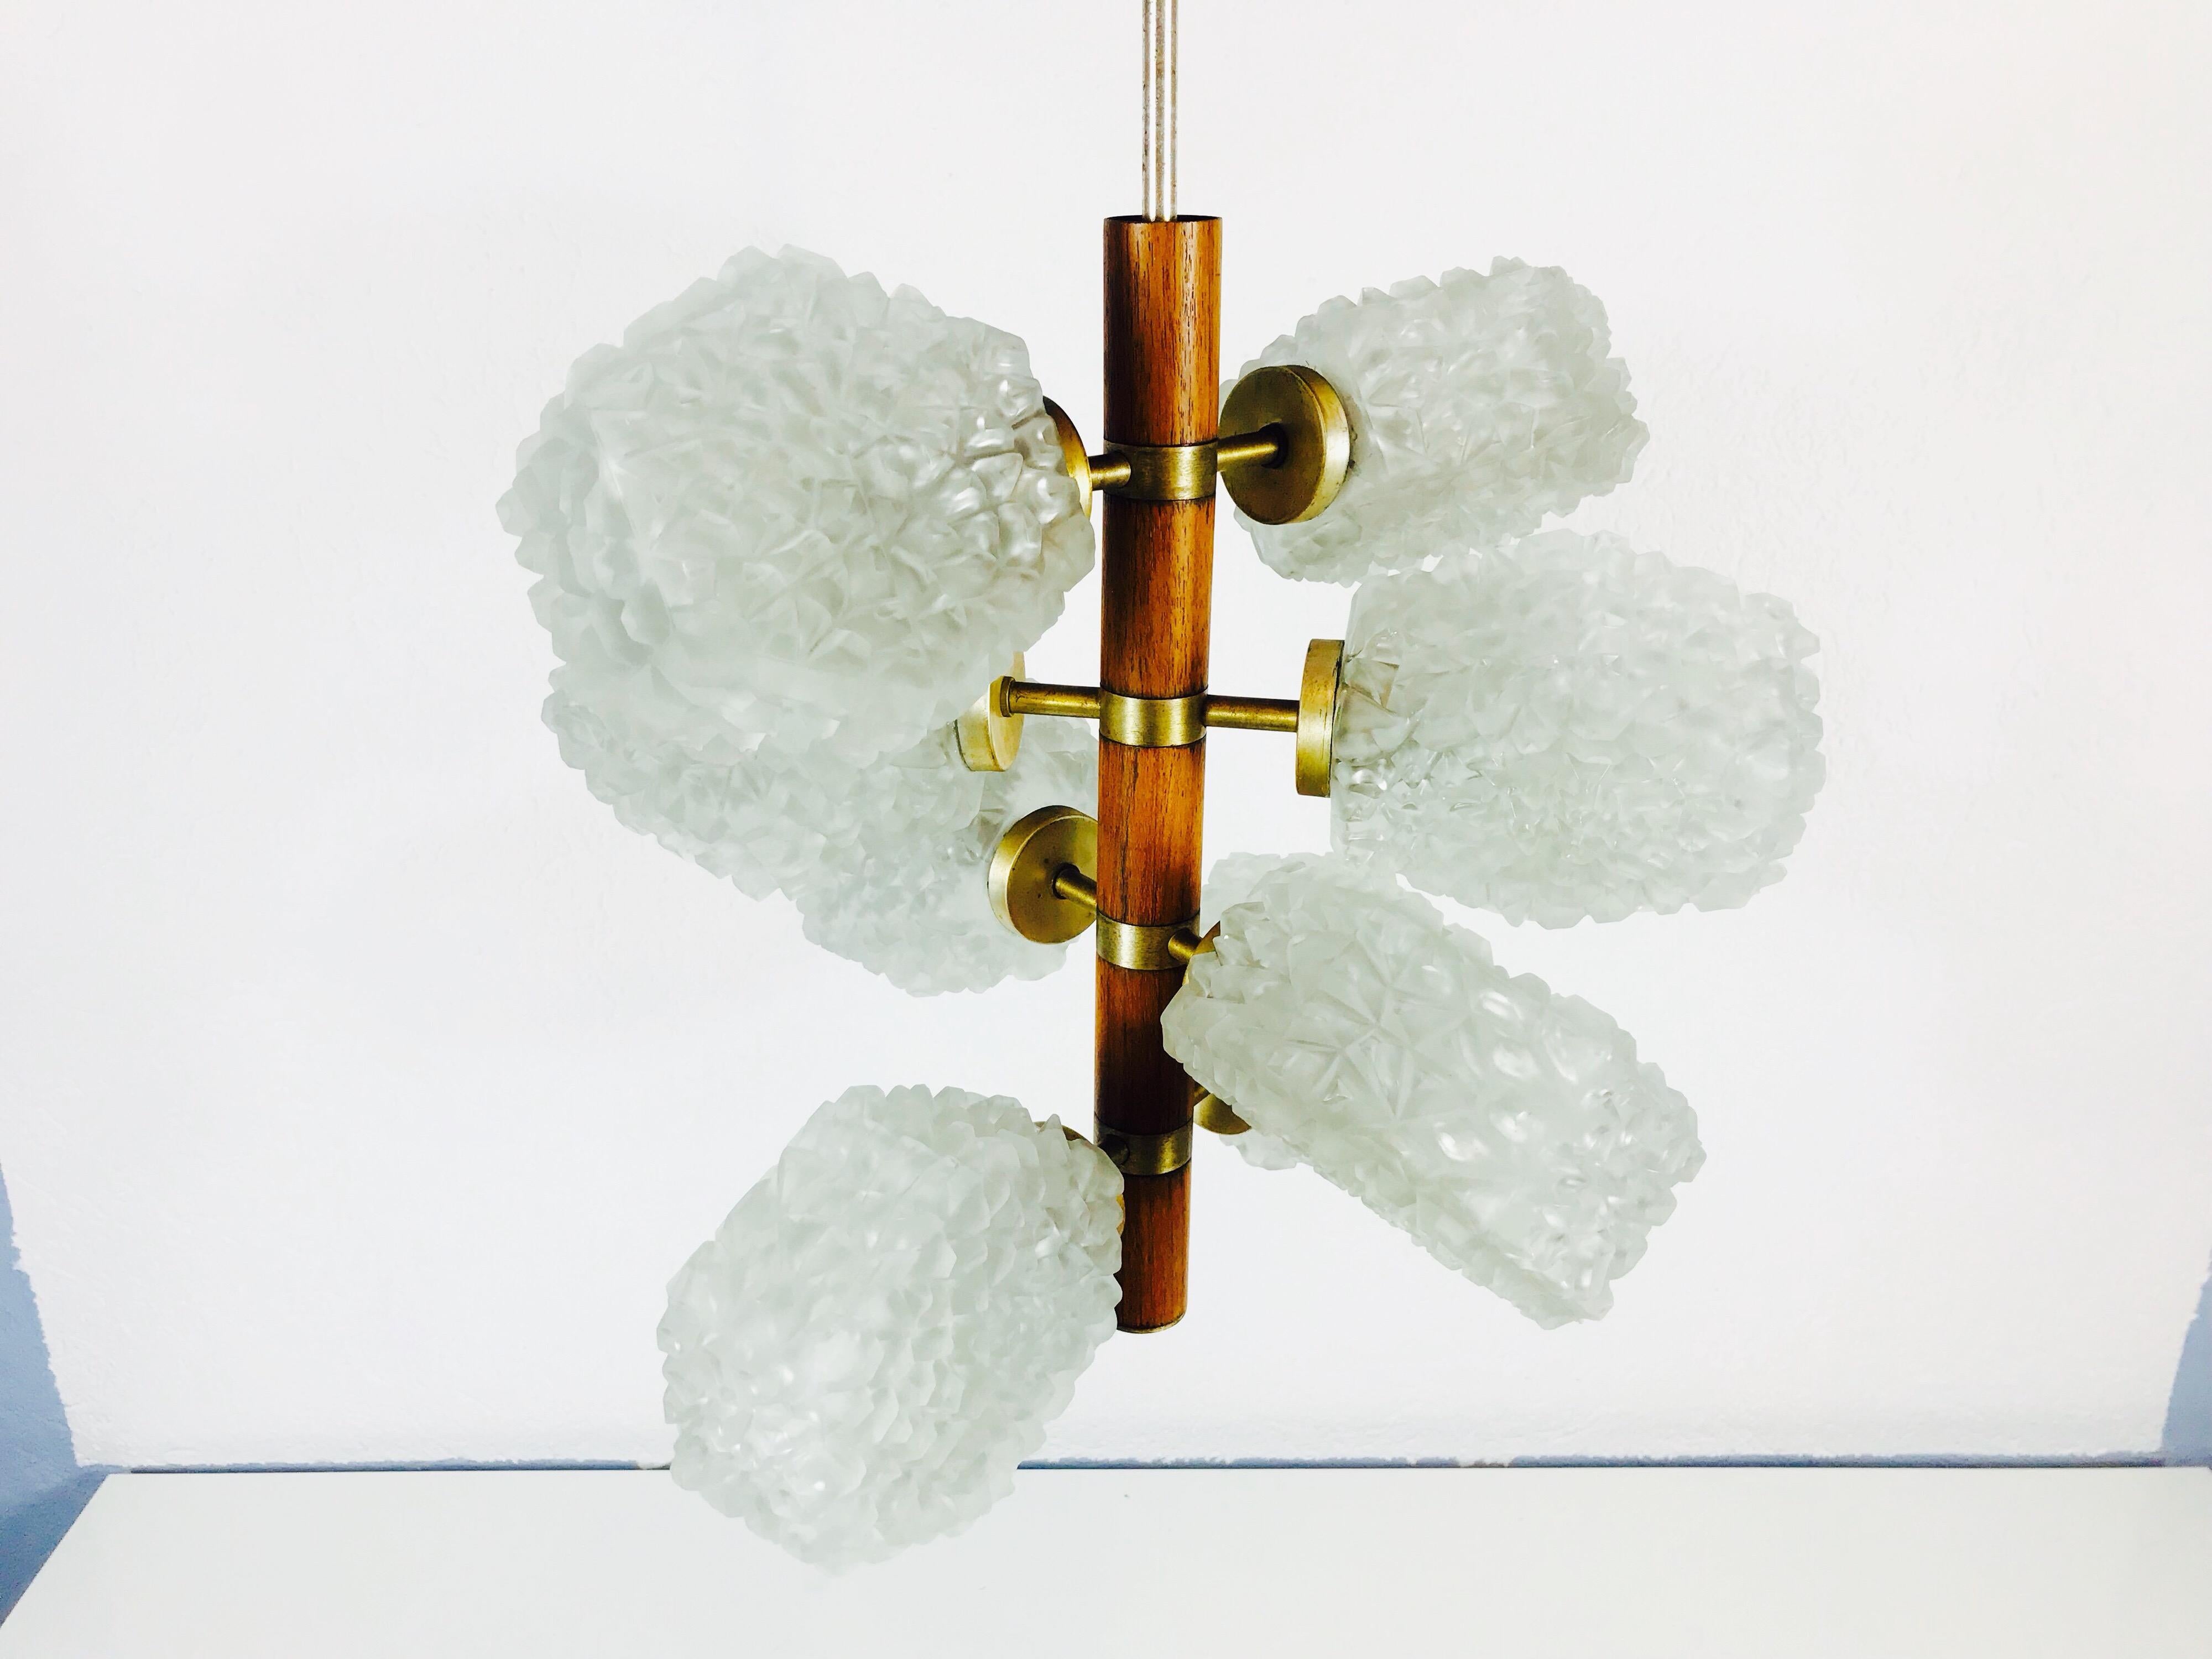 Temde teak and brass adjustable chandelier made in Germany in the 1960s. It is fascinating with its rare glass shapes. The eight arms are all adjustable and are made of polished brass. The long bar above the lamp is also brass